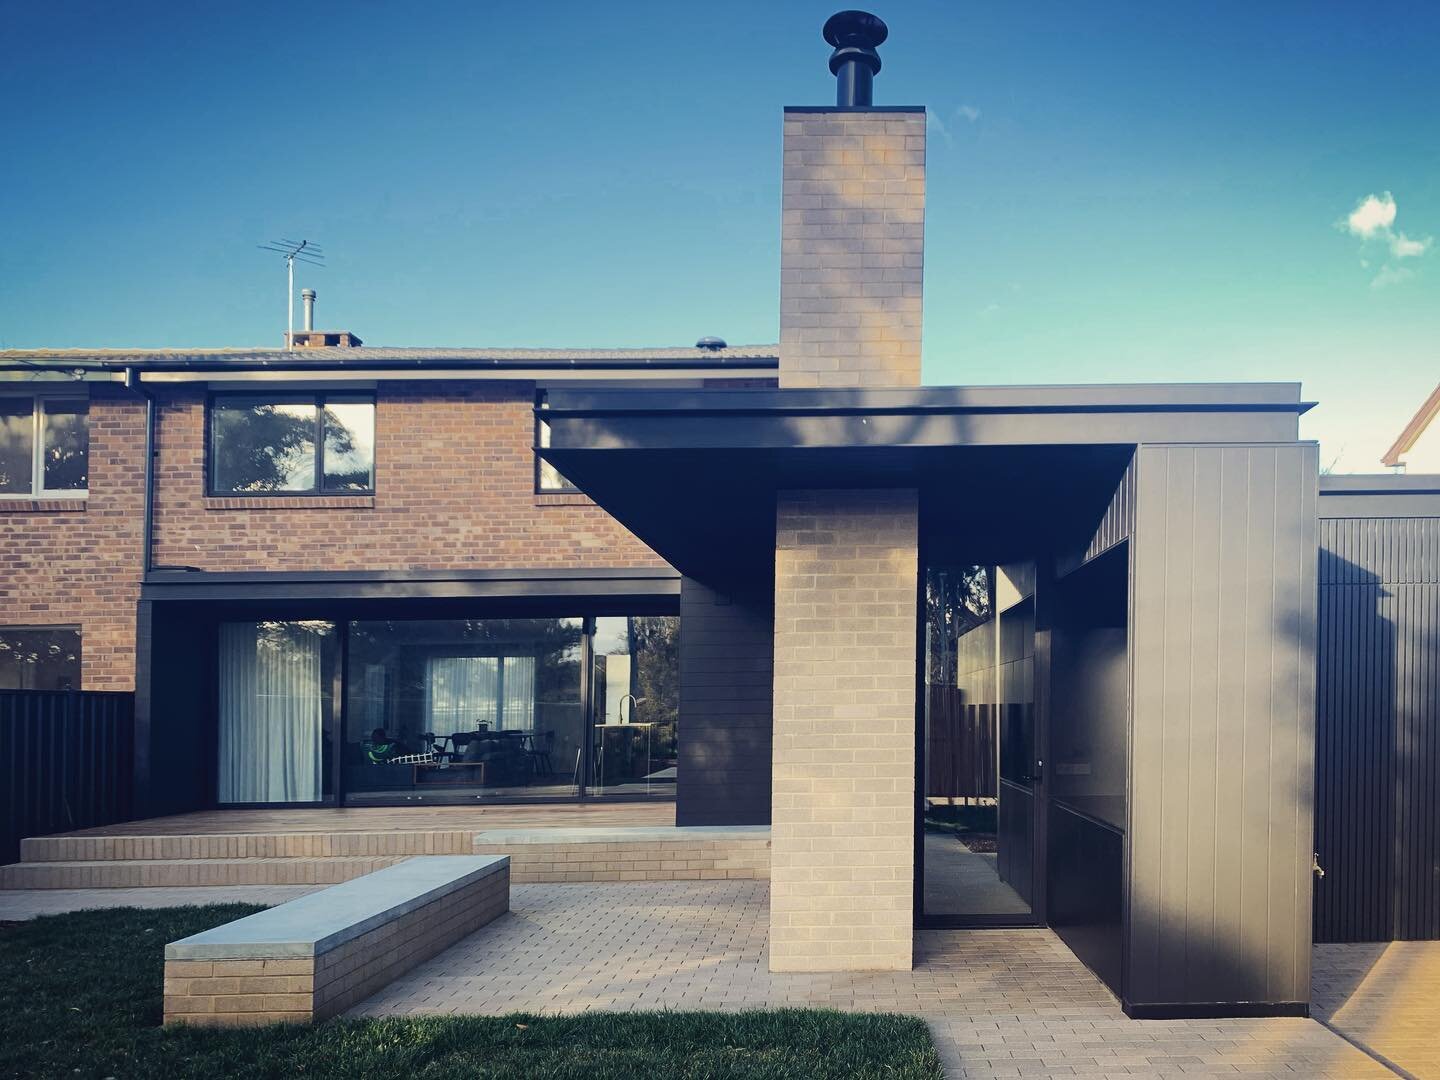 Lyneham House Extension // so lovely to drop by and see the finished product.
Architect: @de.rome.architects 
Builder: @braithwaitebuilding 
#architecture #design #house 
@ziwa.house